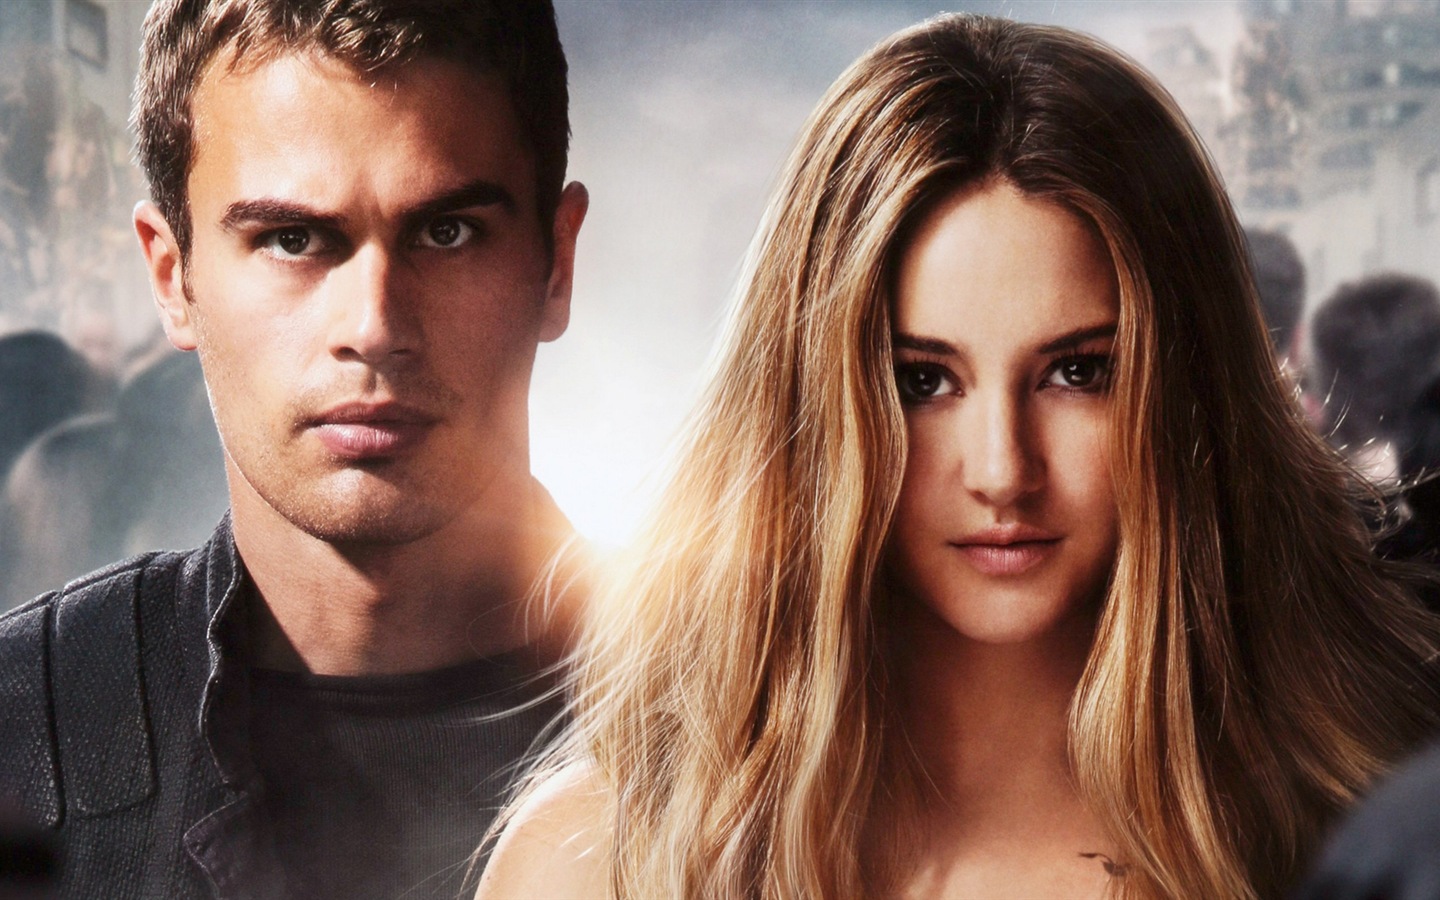 Divergent movie HD wallpapers #2 - 1440x900